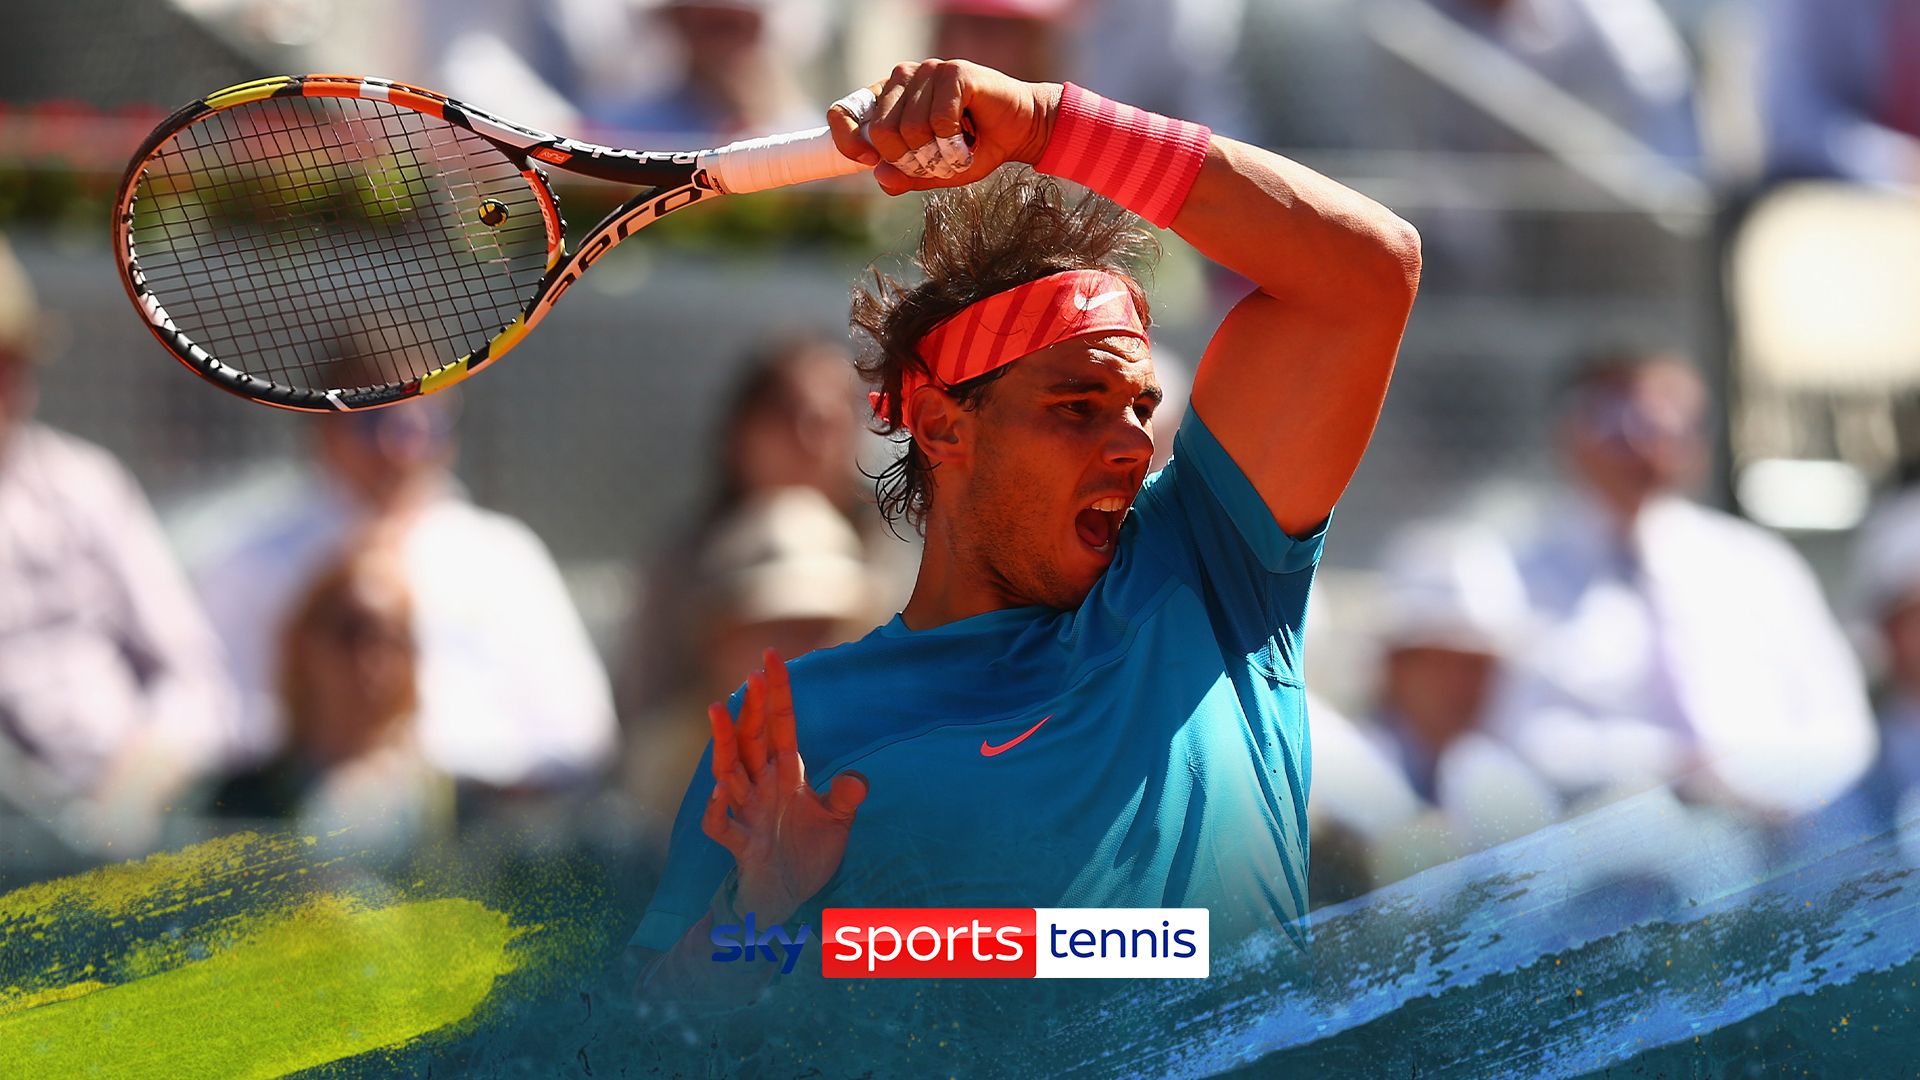 Nadal & Norrie in action at the Madrid Open LIVE!